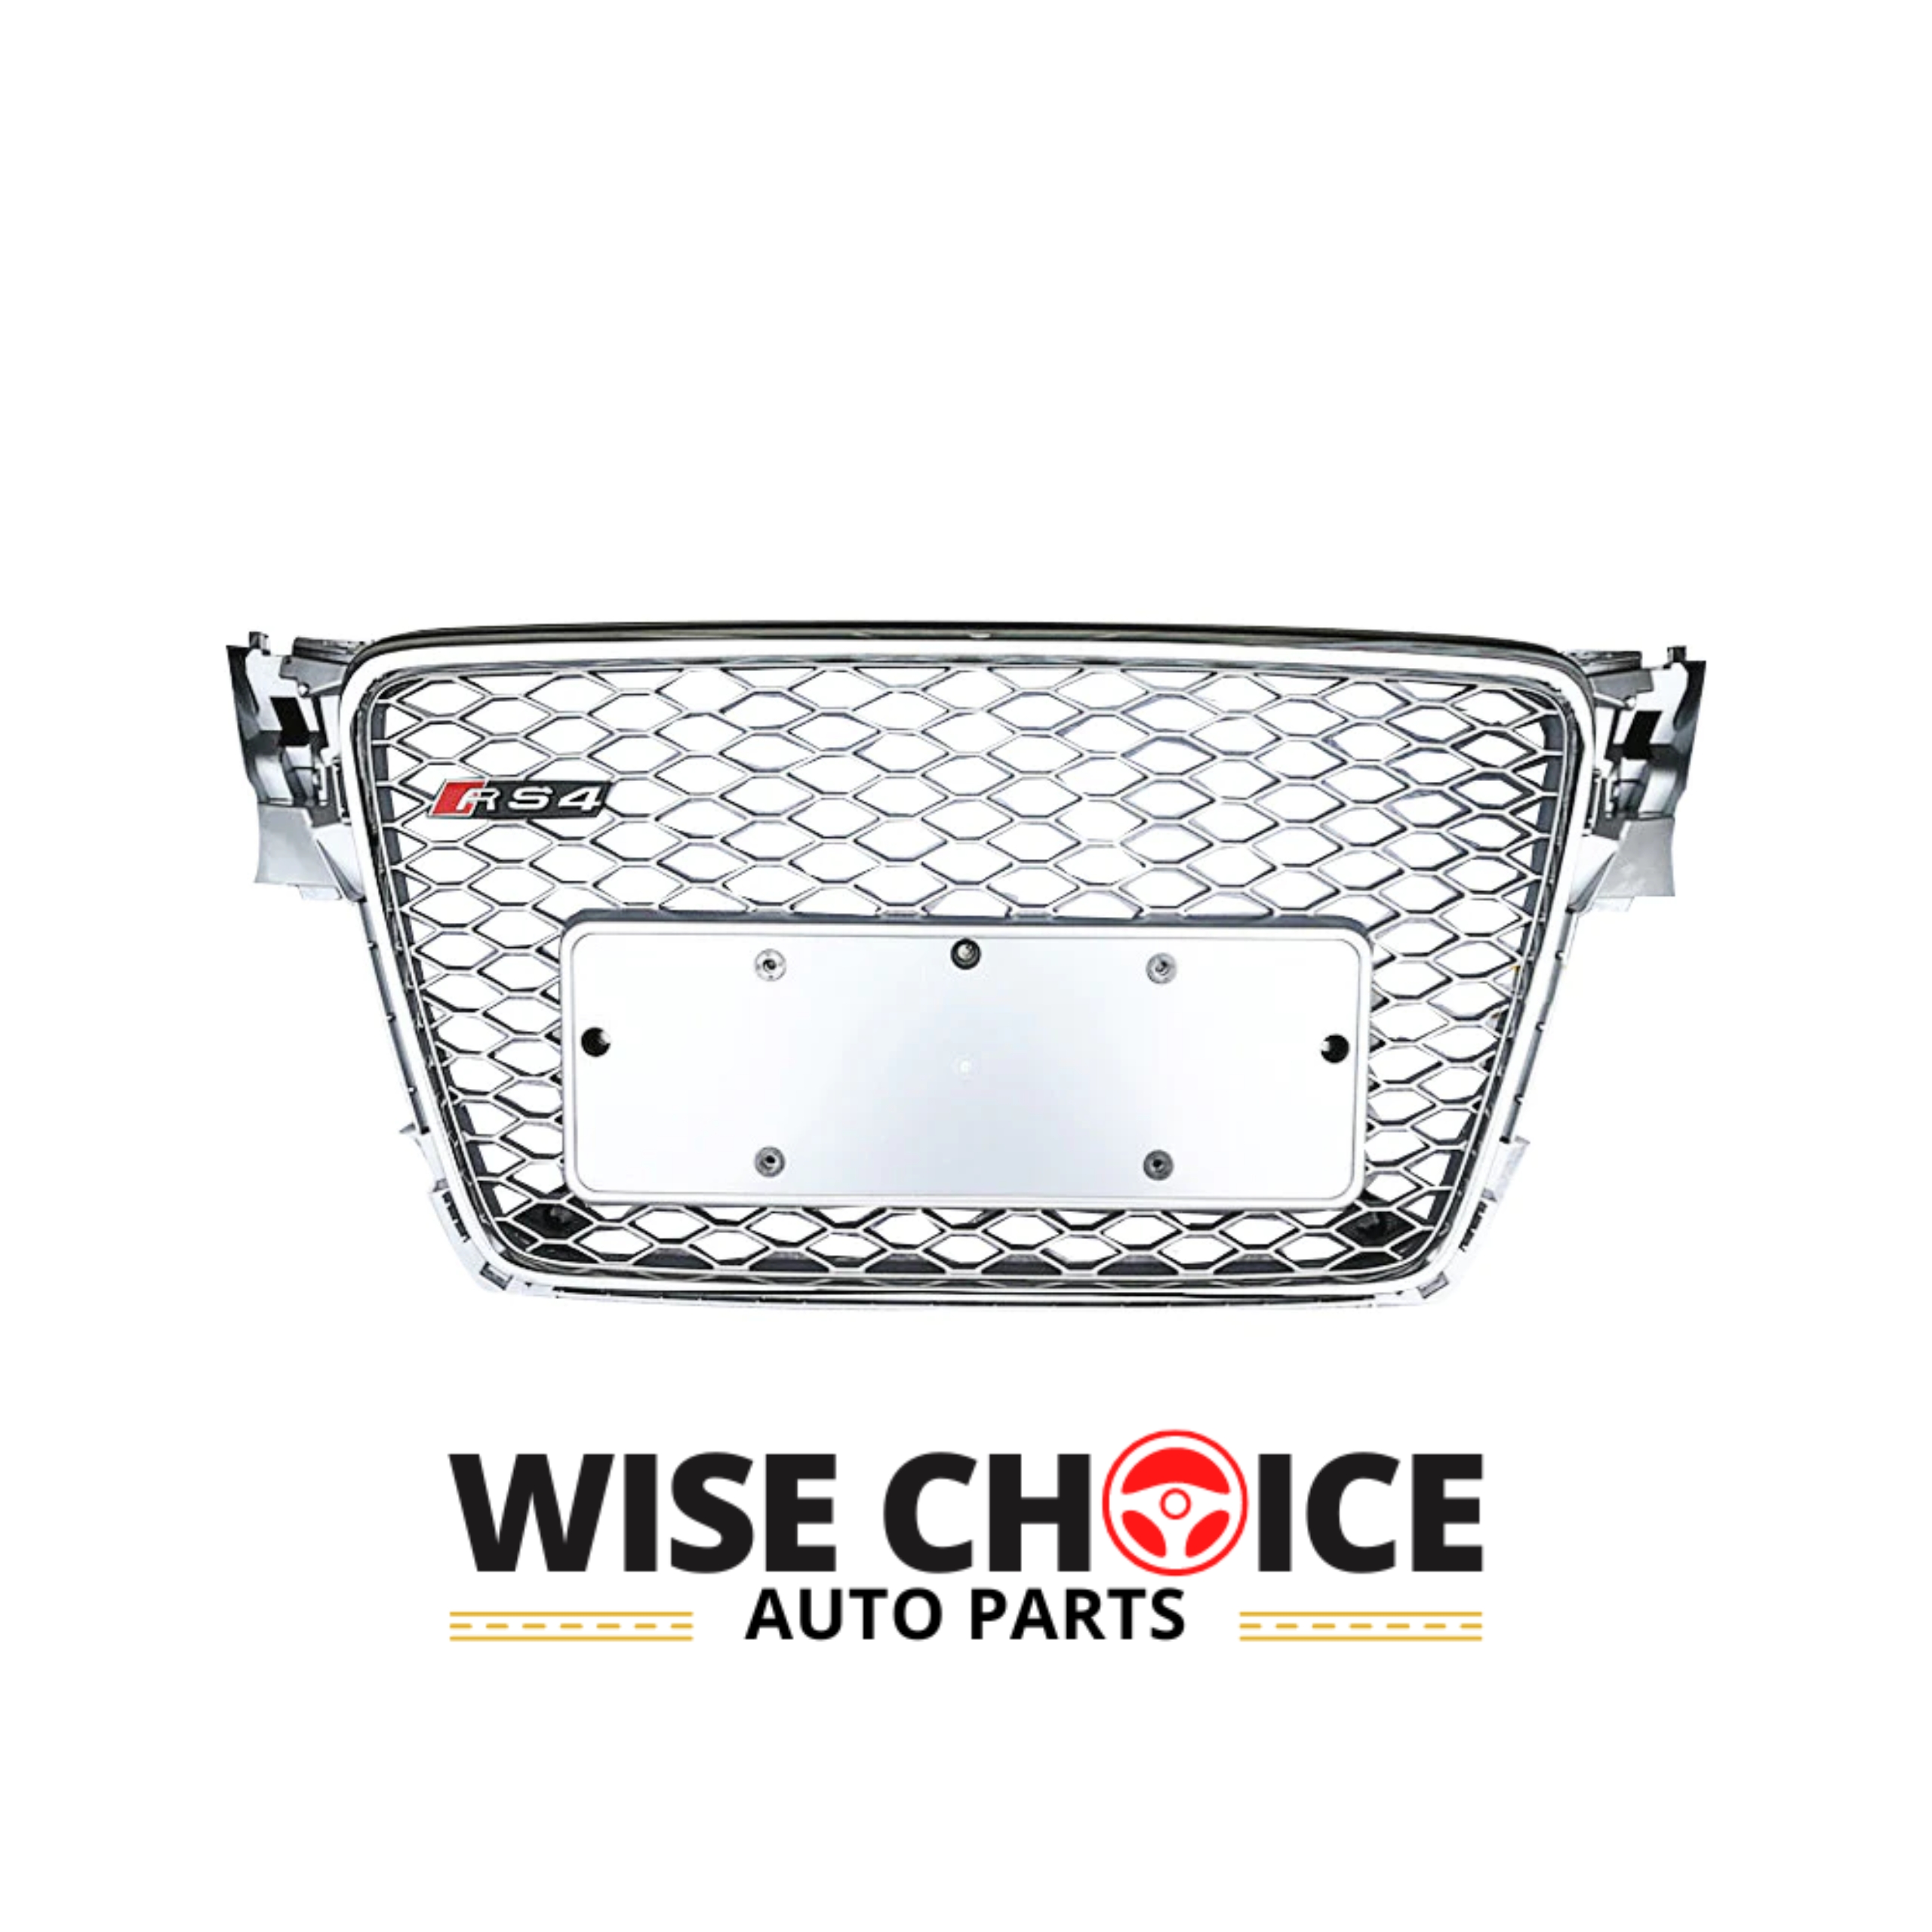 Audi RS4 Honeycomb Front Grille in Silver for 2009-2012 B8 A4/S4 models